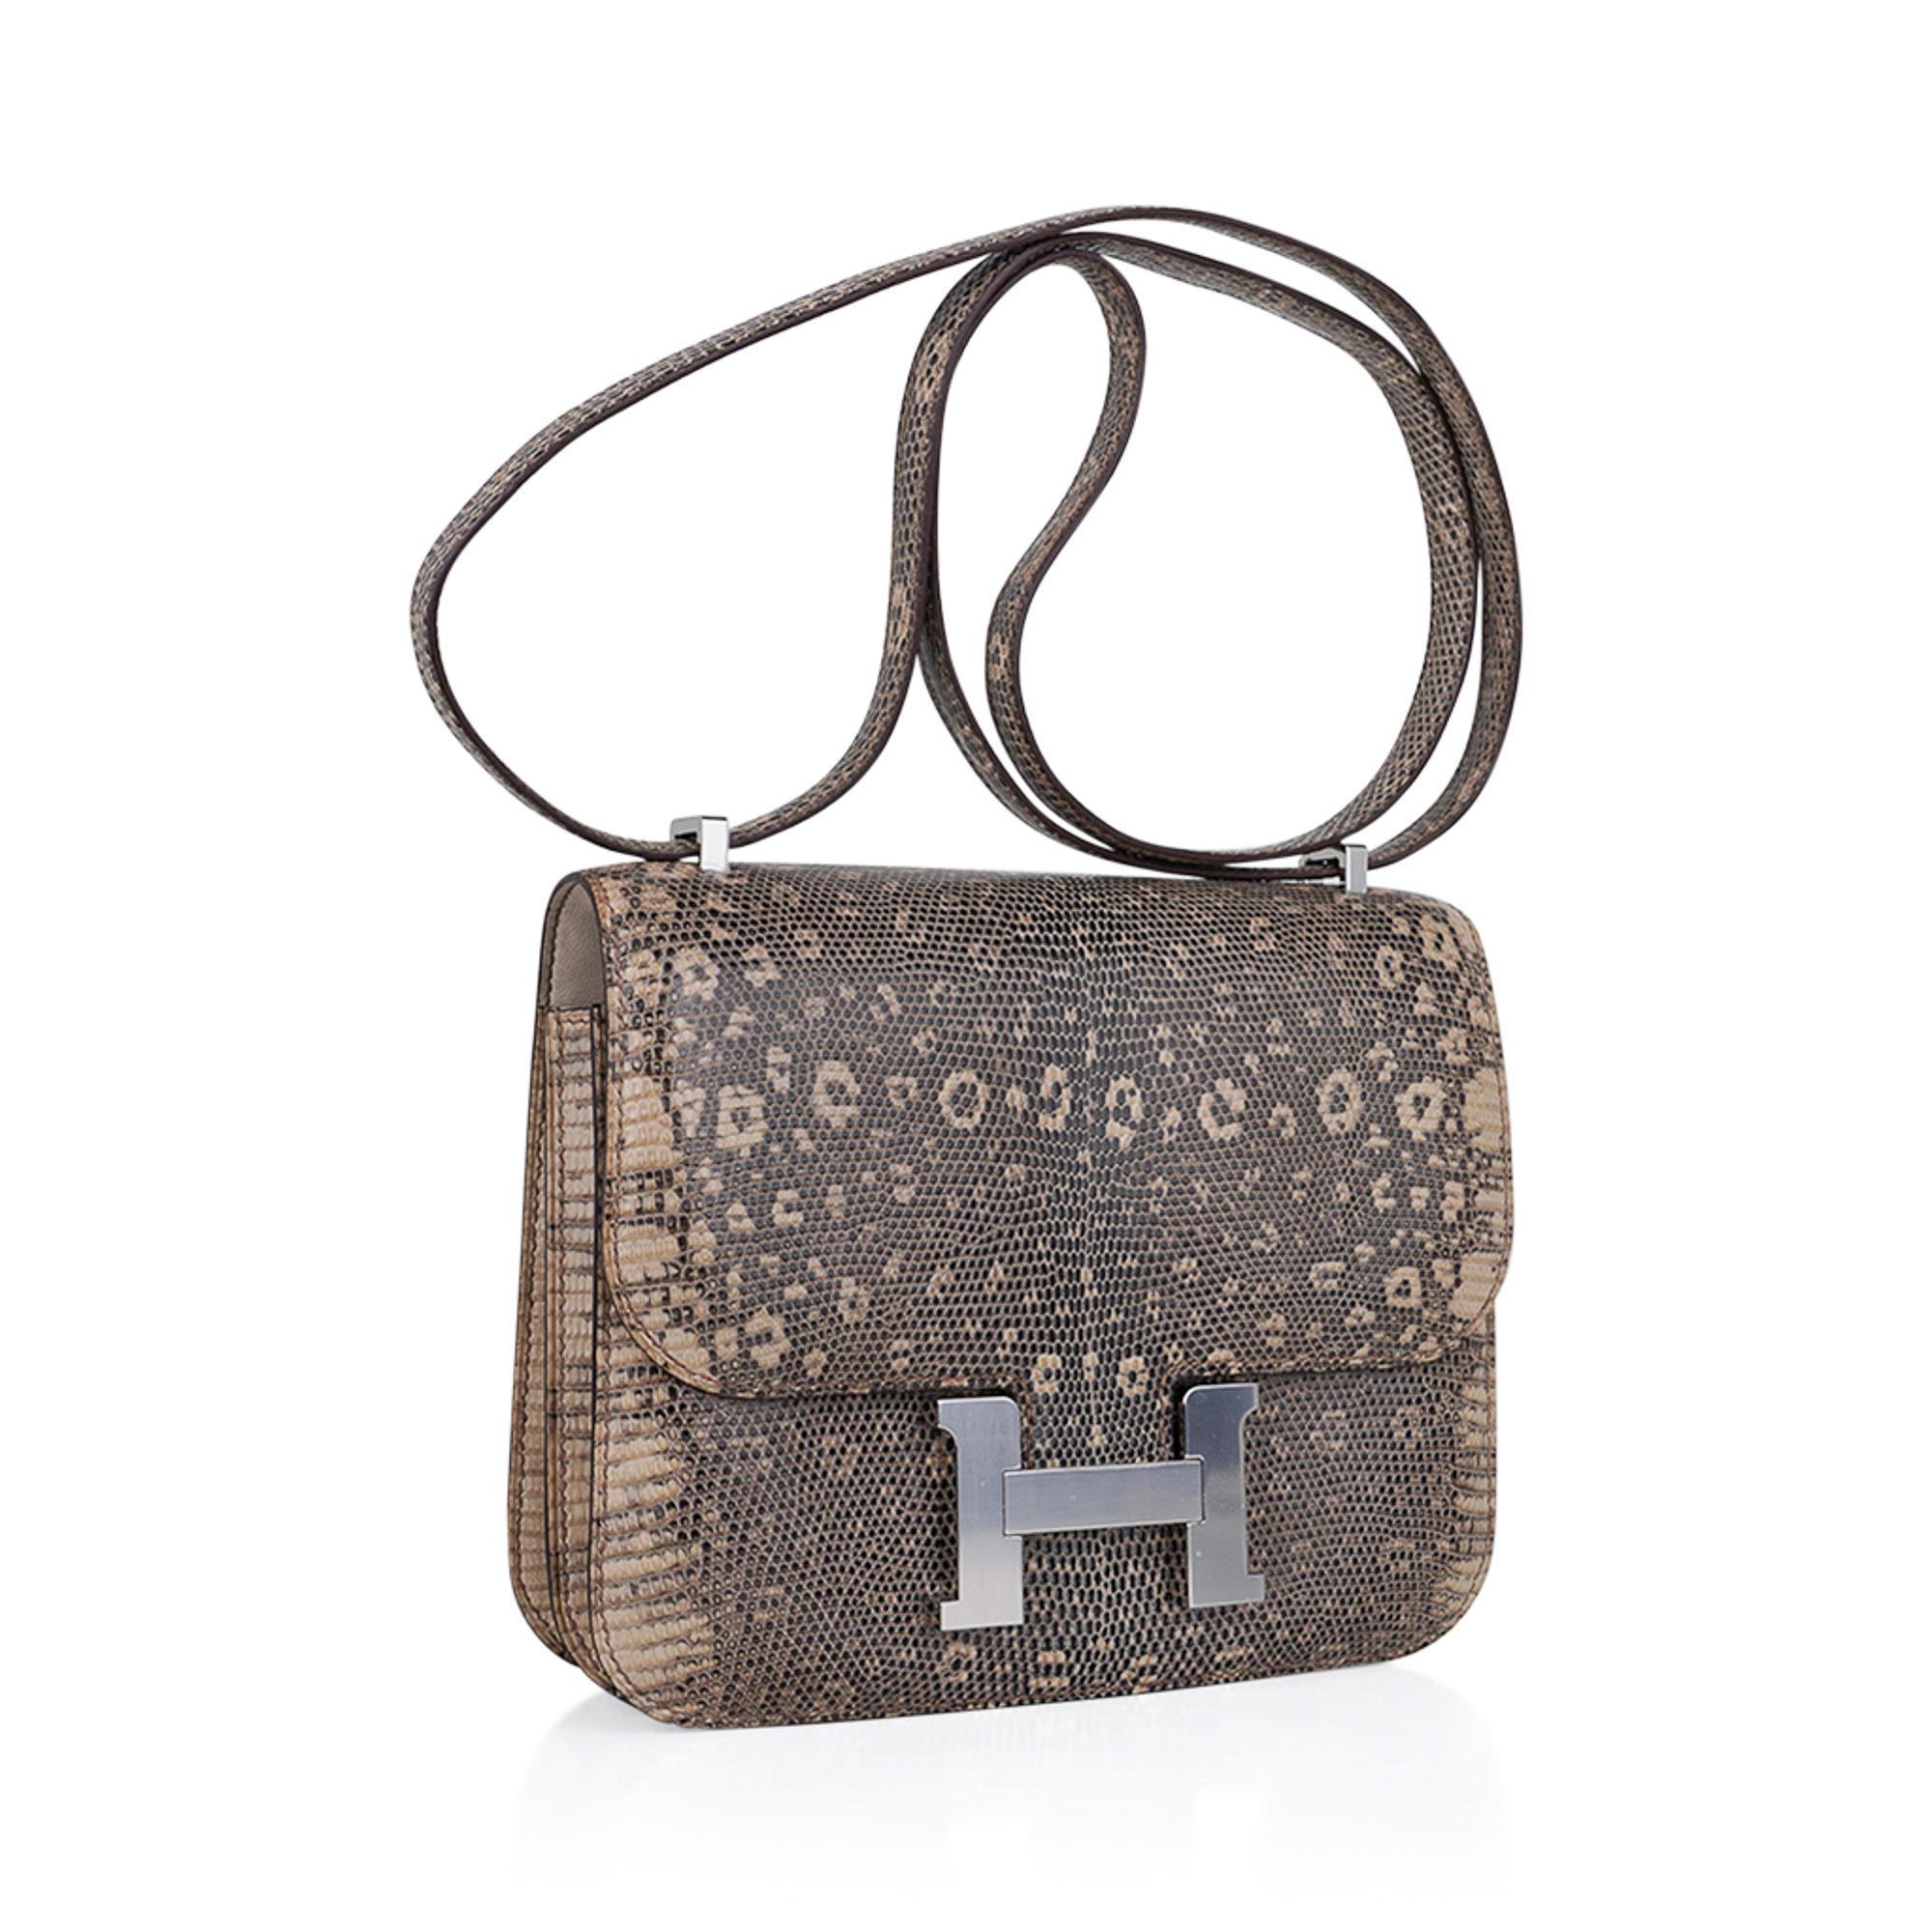 Mightychic offers an Hermes Constance 18 bag featured limited edition Desert Lizard.
Exquisite markings with fresh Palladium hardware.
HERMES PARIS MADE IN FRANCE is stamped on front under flap.
Comes with Hermes sleeper and signature box.
NEW or